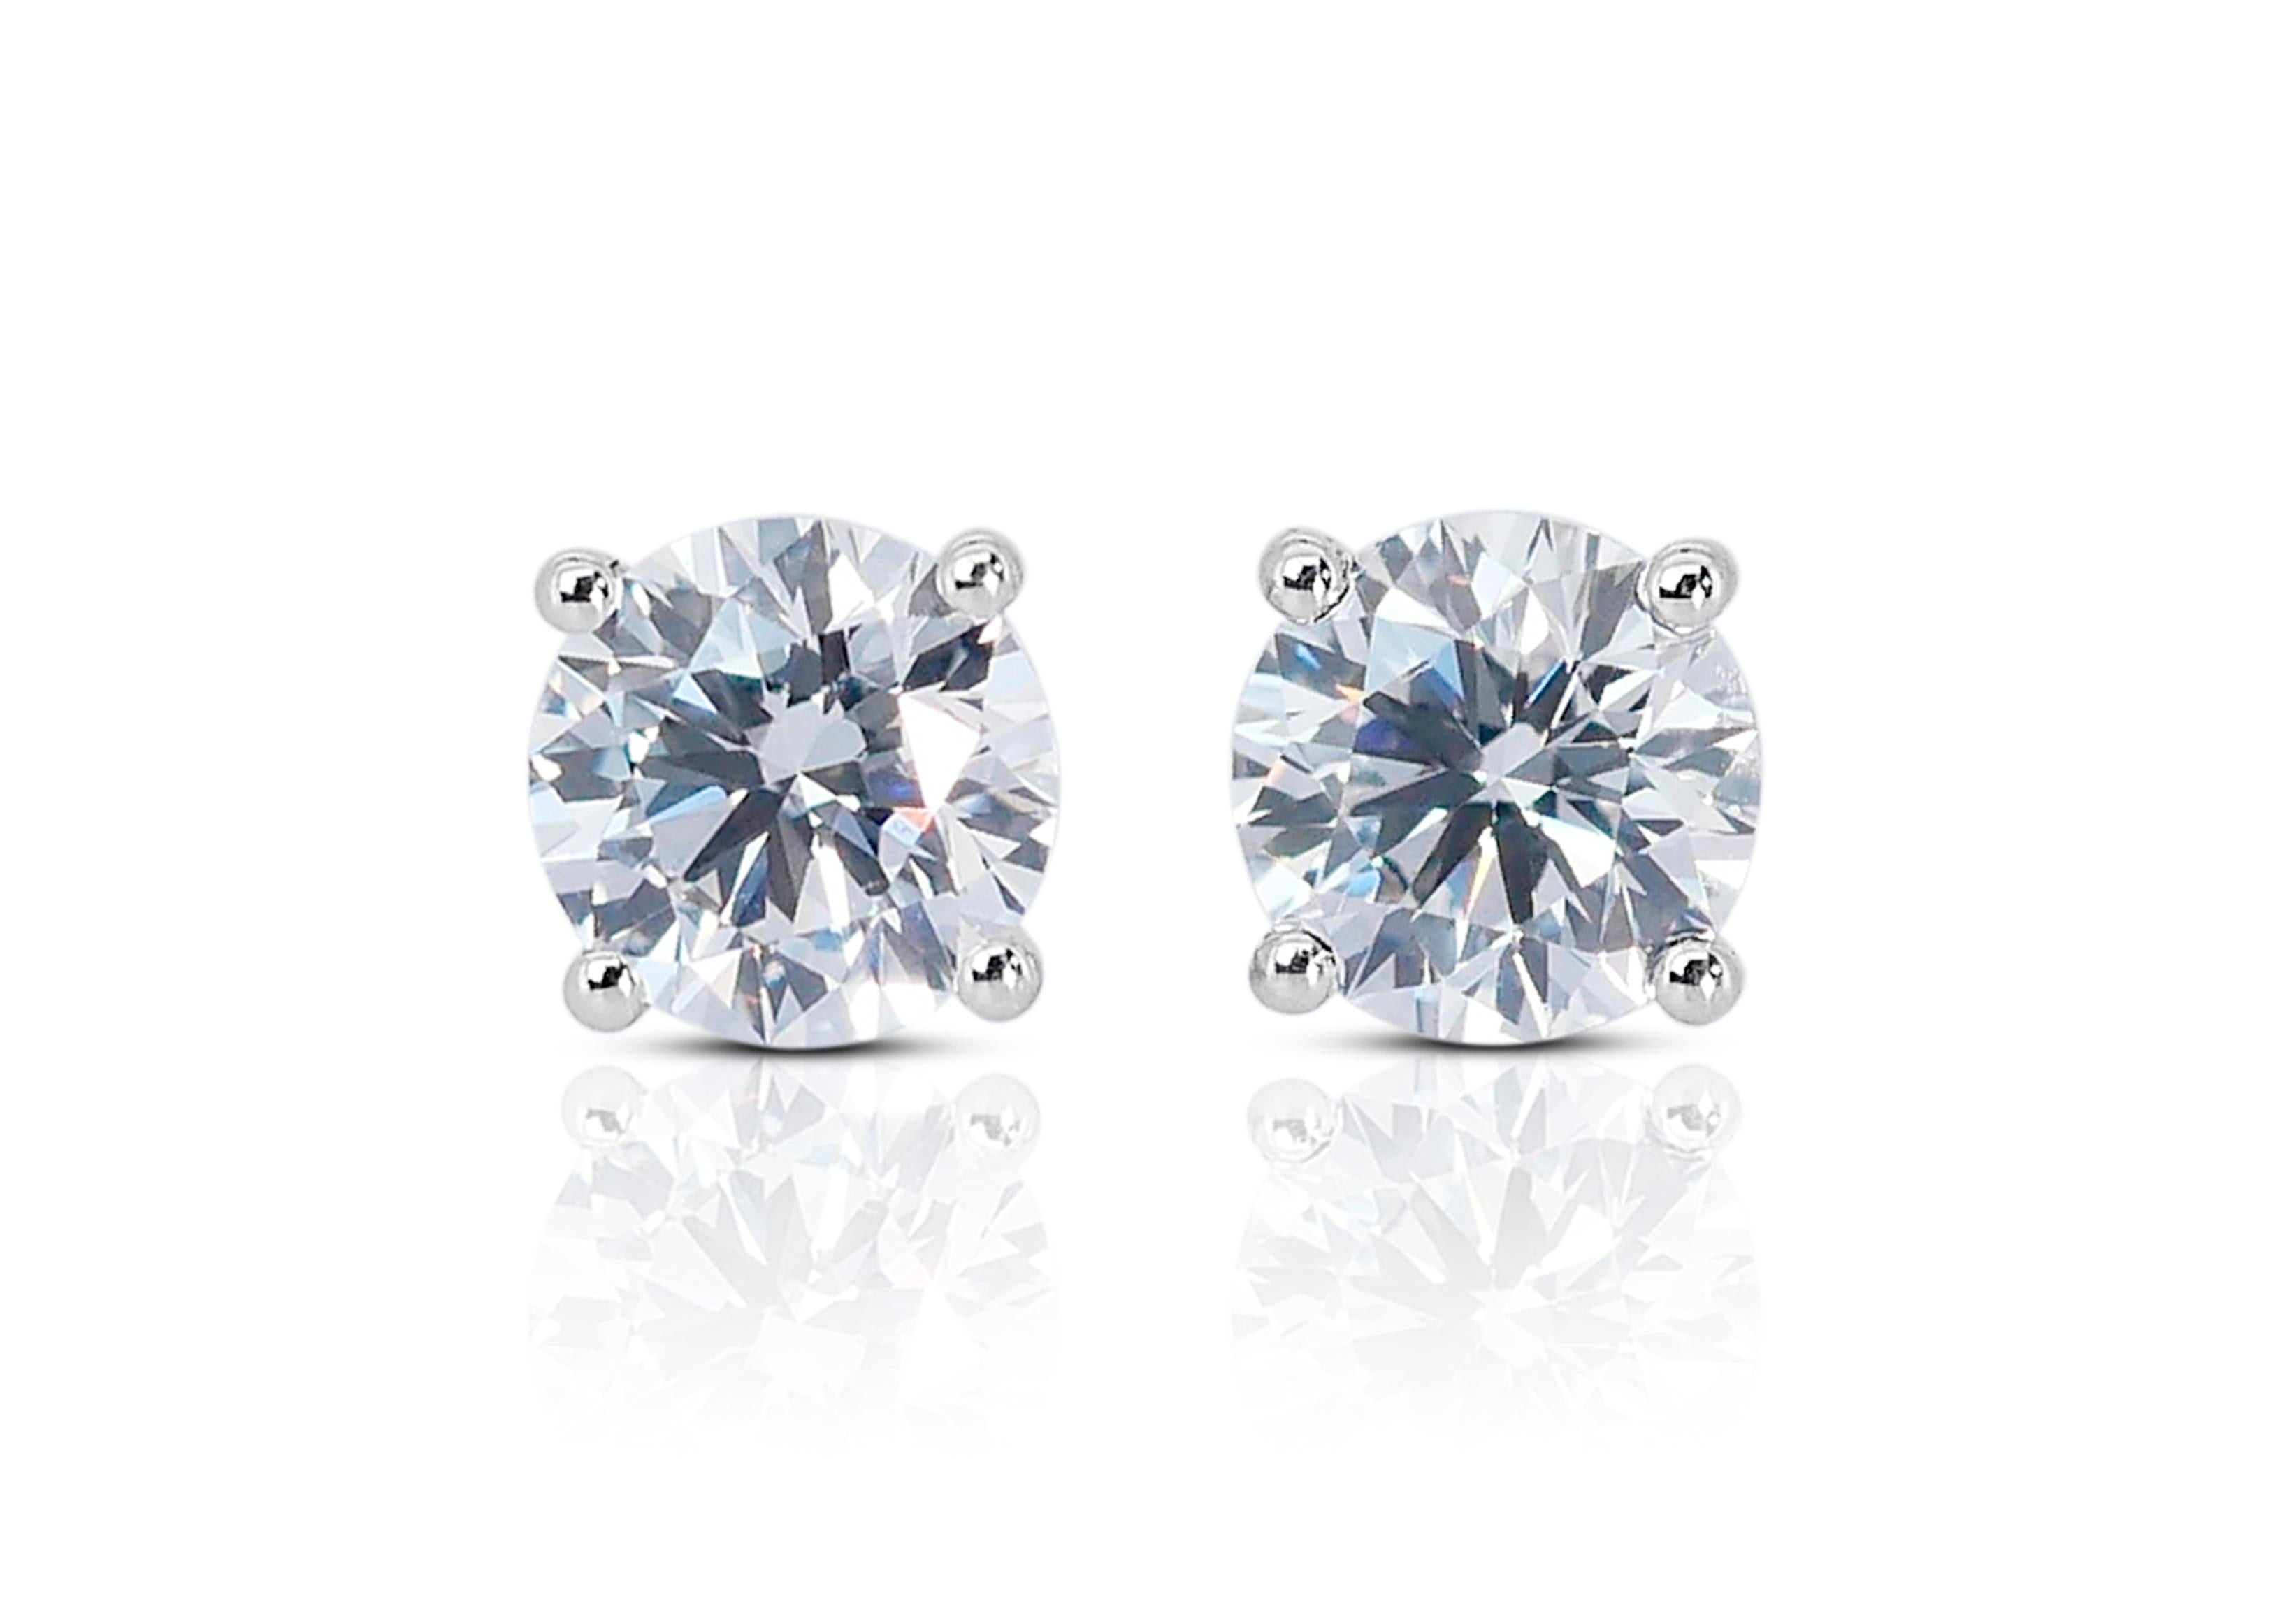 Spectacular 2.06ct Diamond Stud Earrings in 18k White Gold - GIA Certified For Sale 5